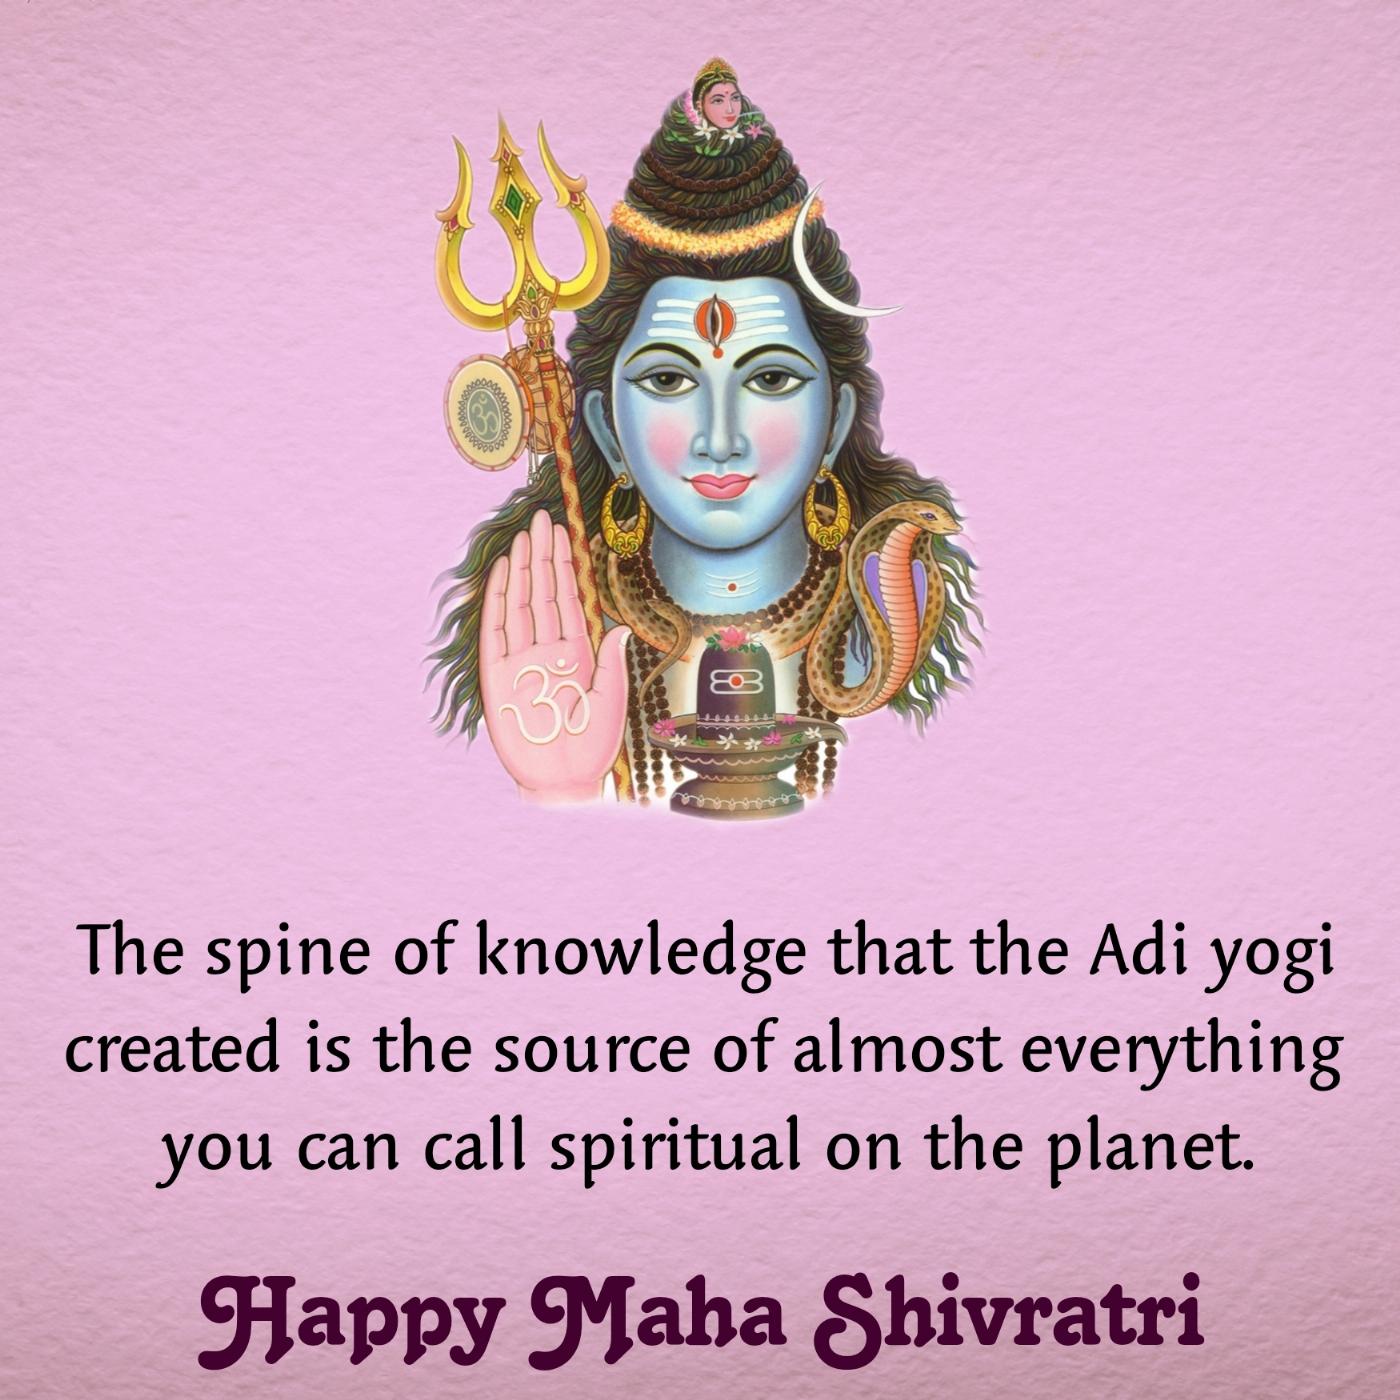 The spine of knowledge that the Adi yogi created is the source of almost everything